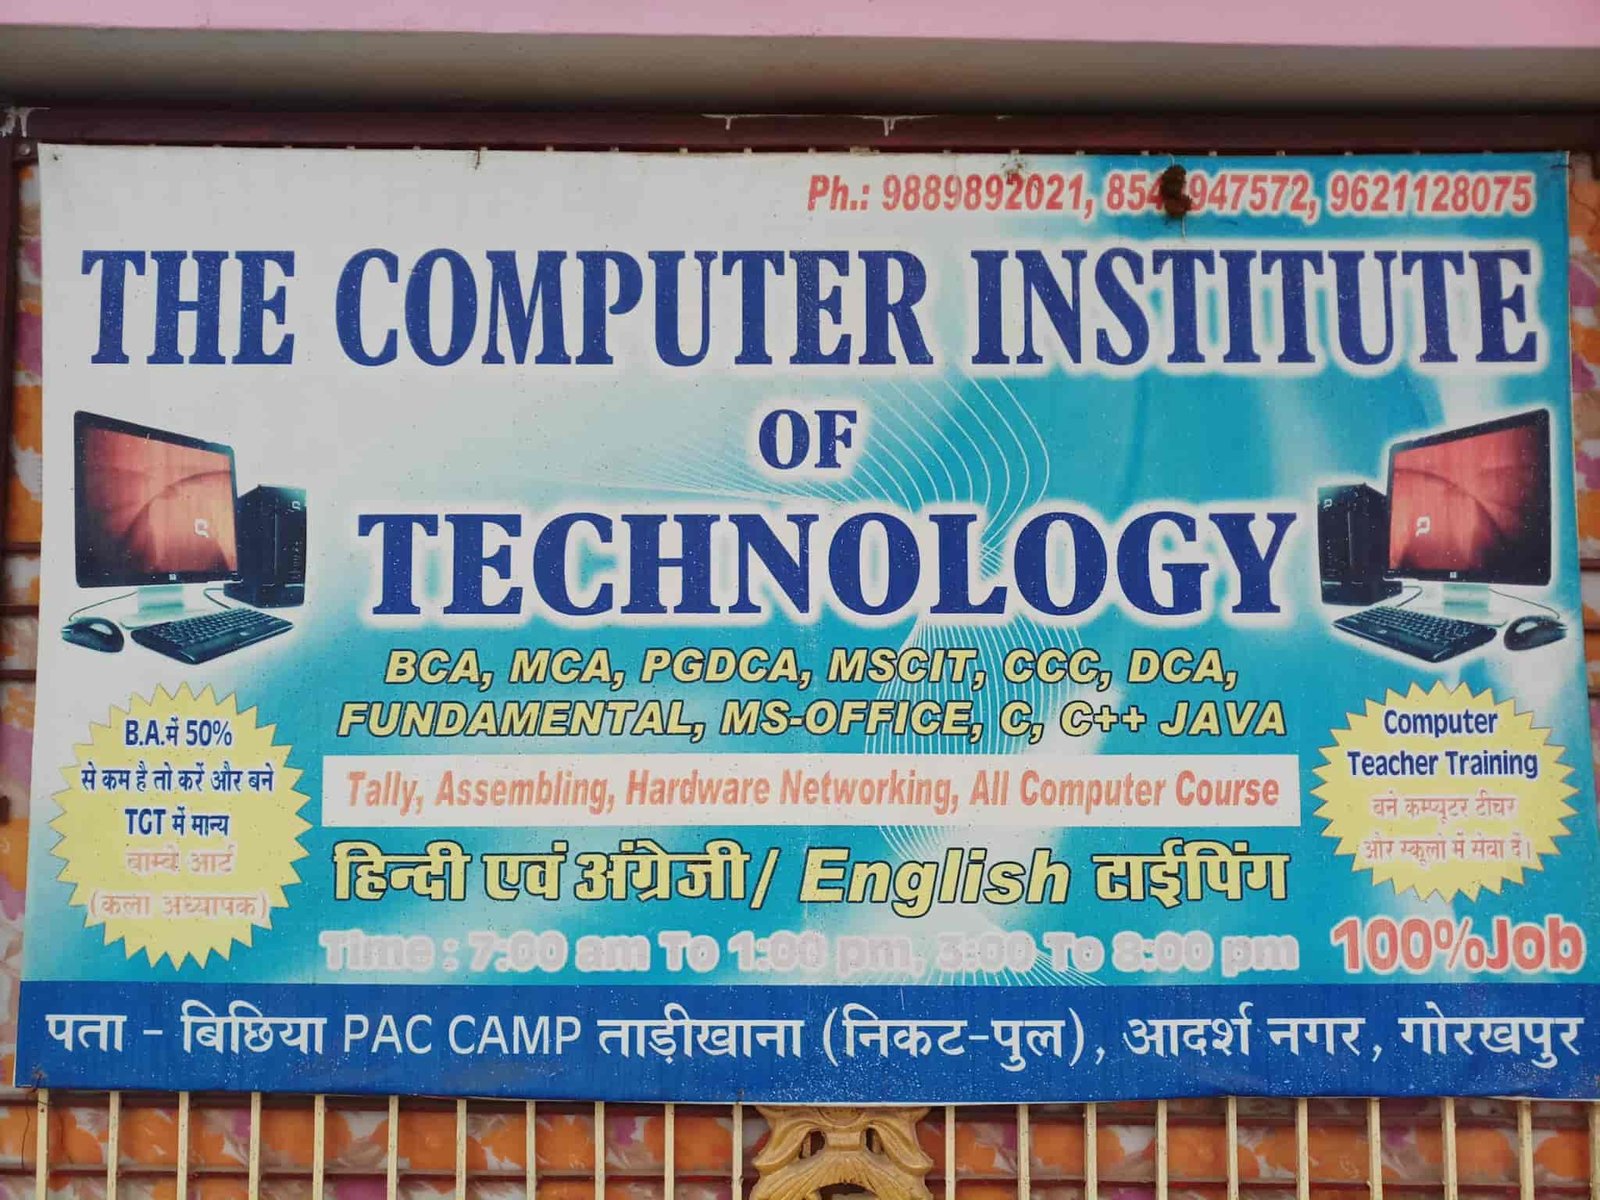 The Computer Institute Technology